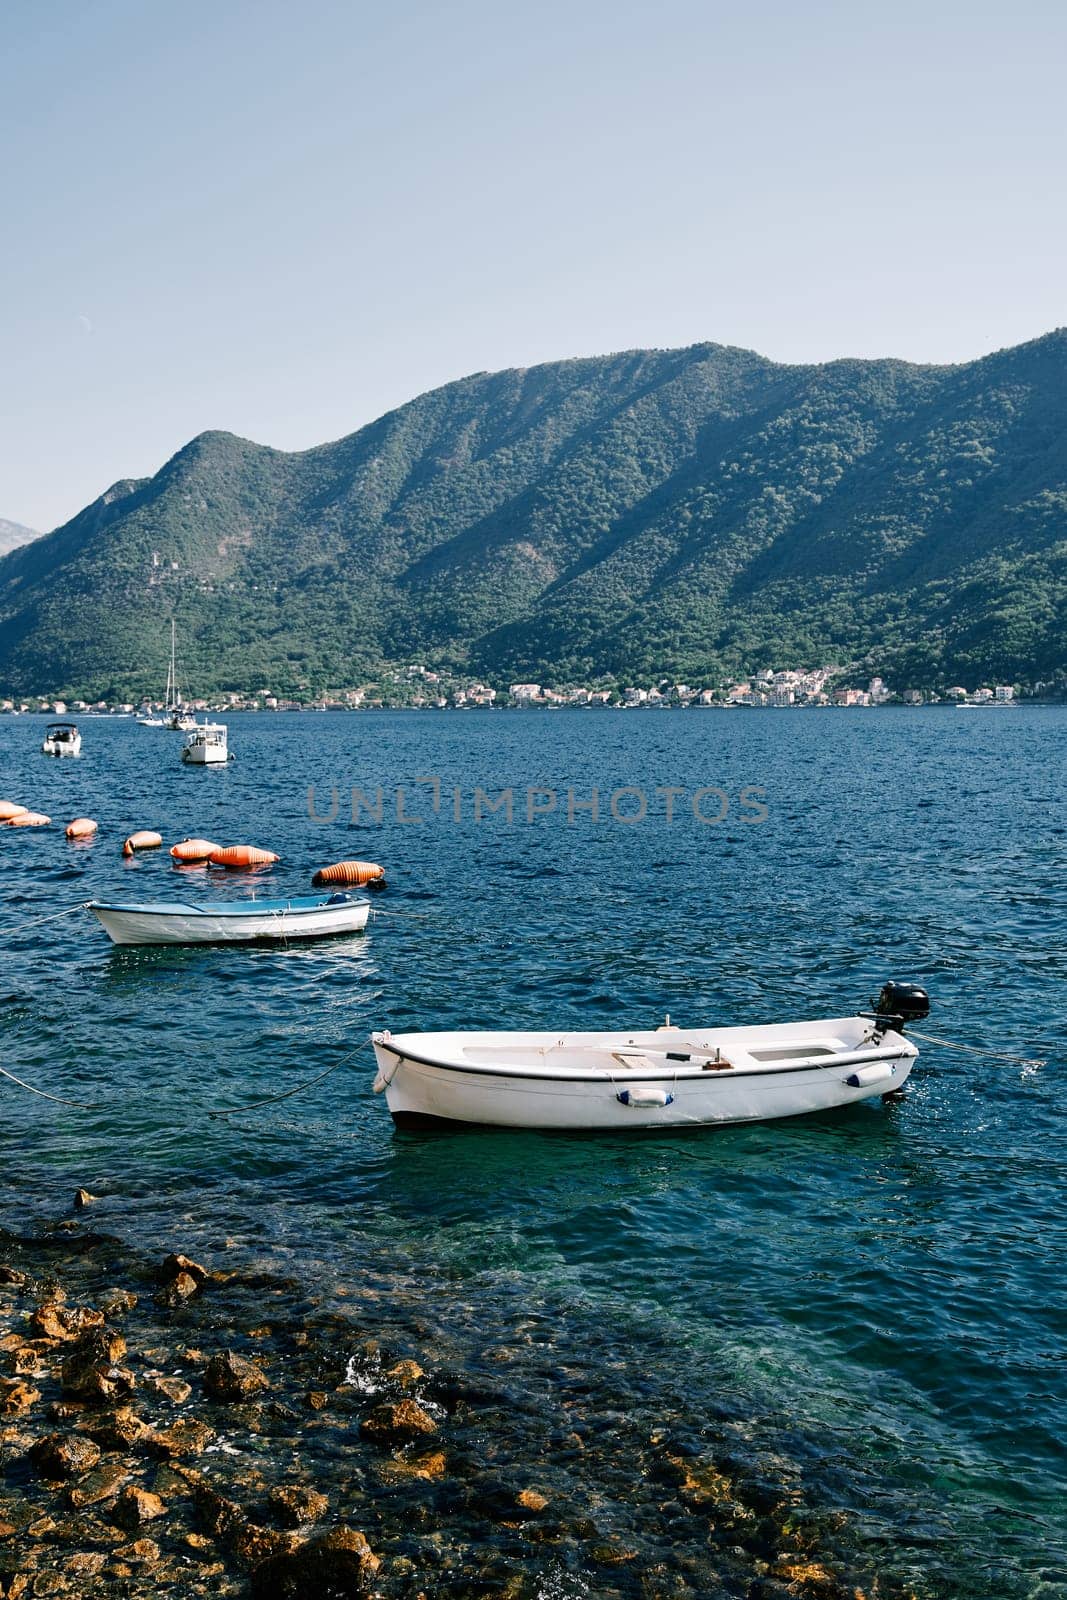 Small motor boats sway on the waves moored near the shore. High quality photo